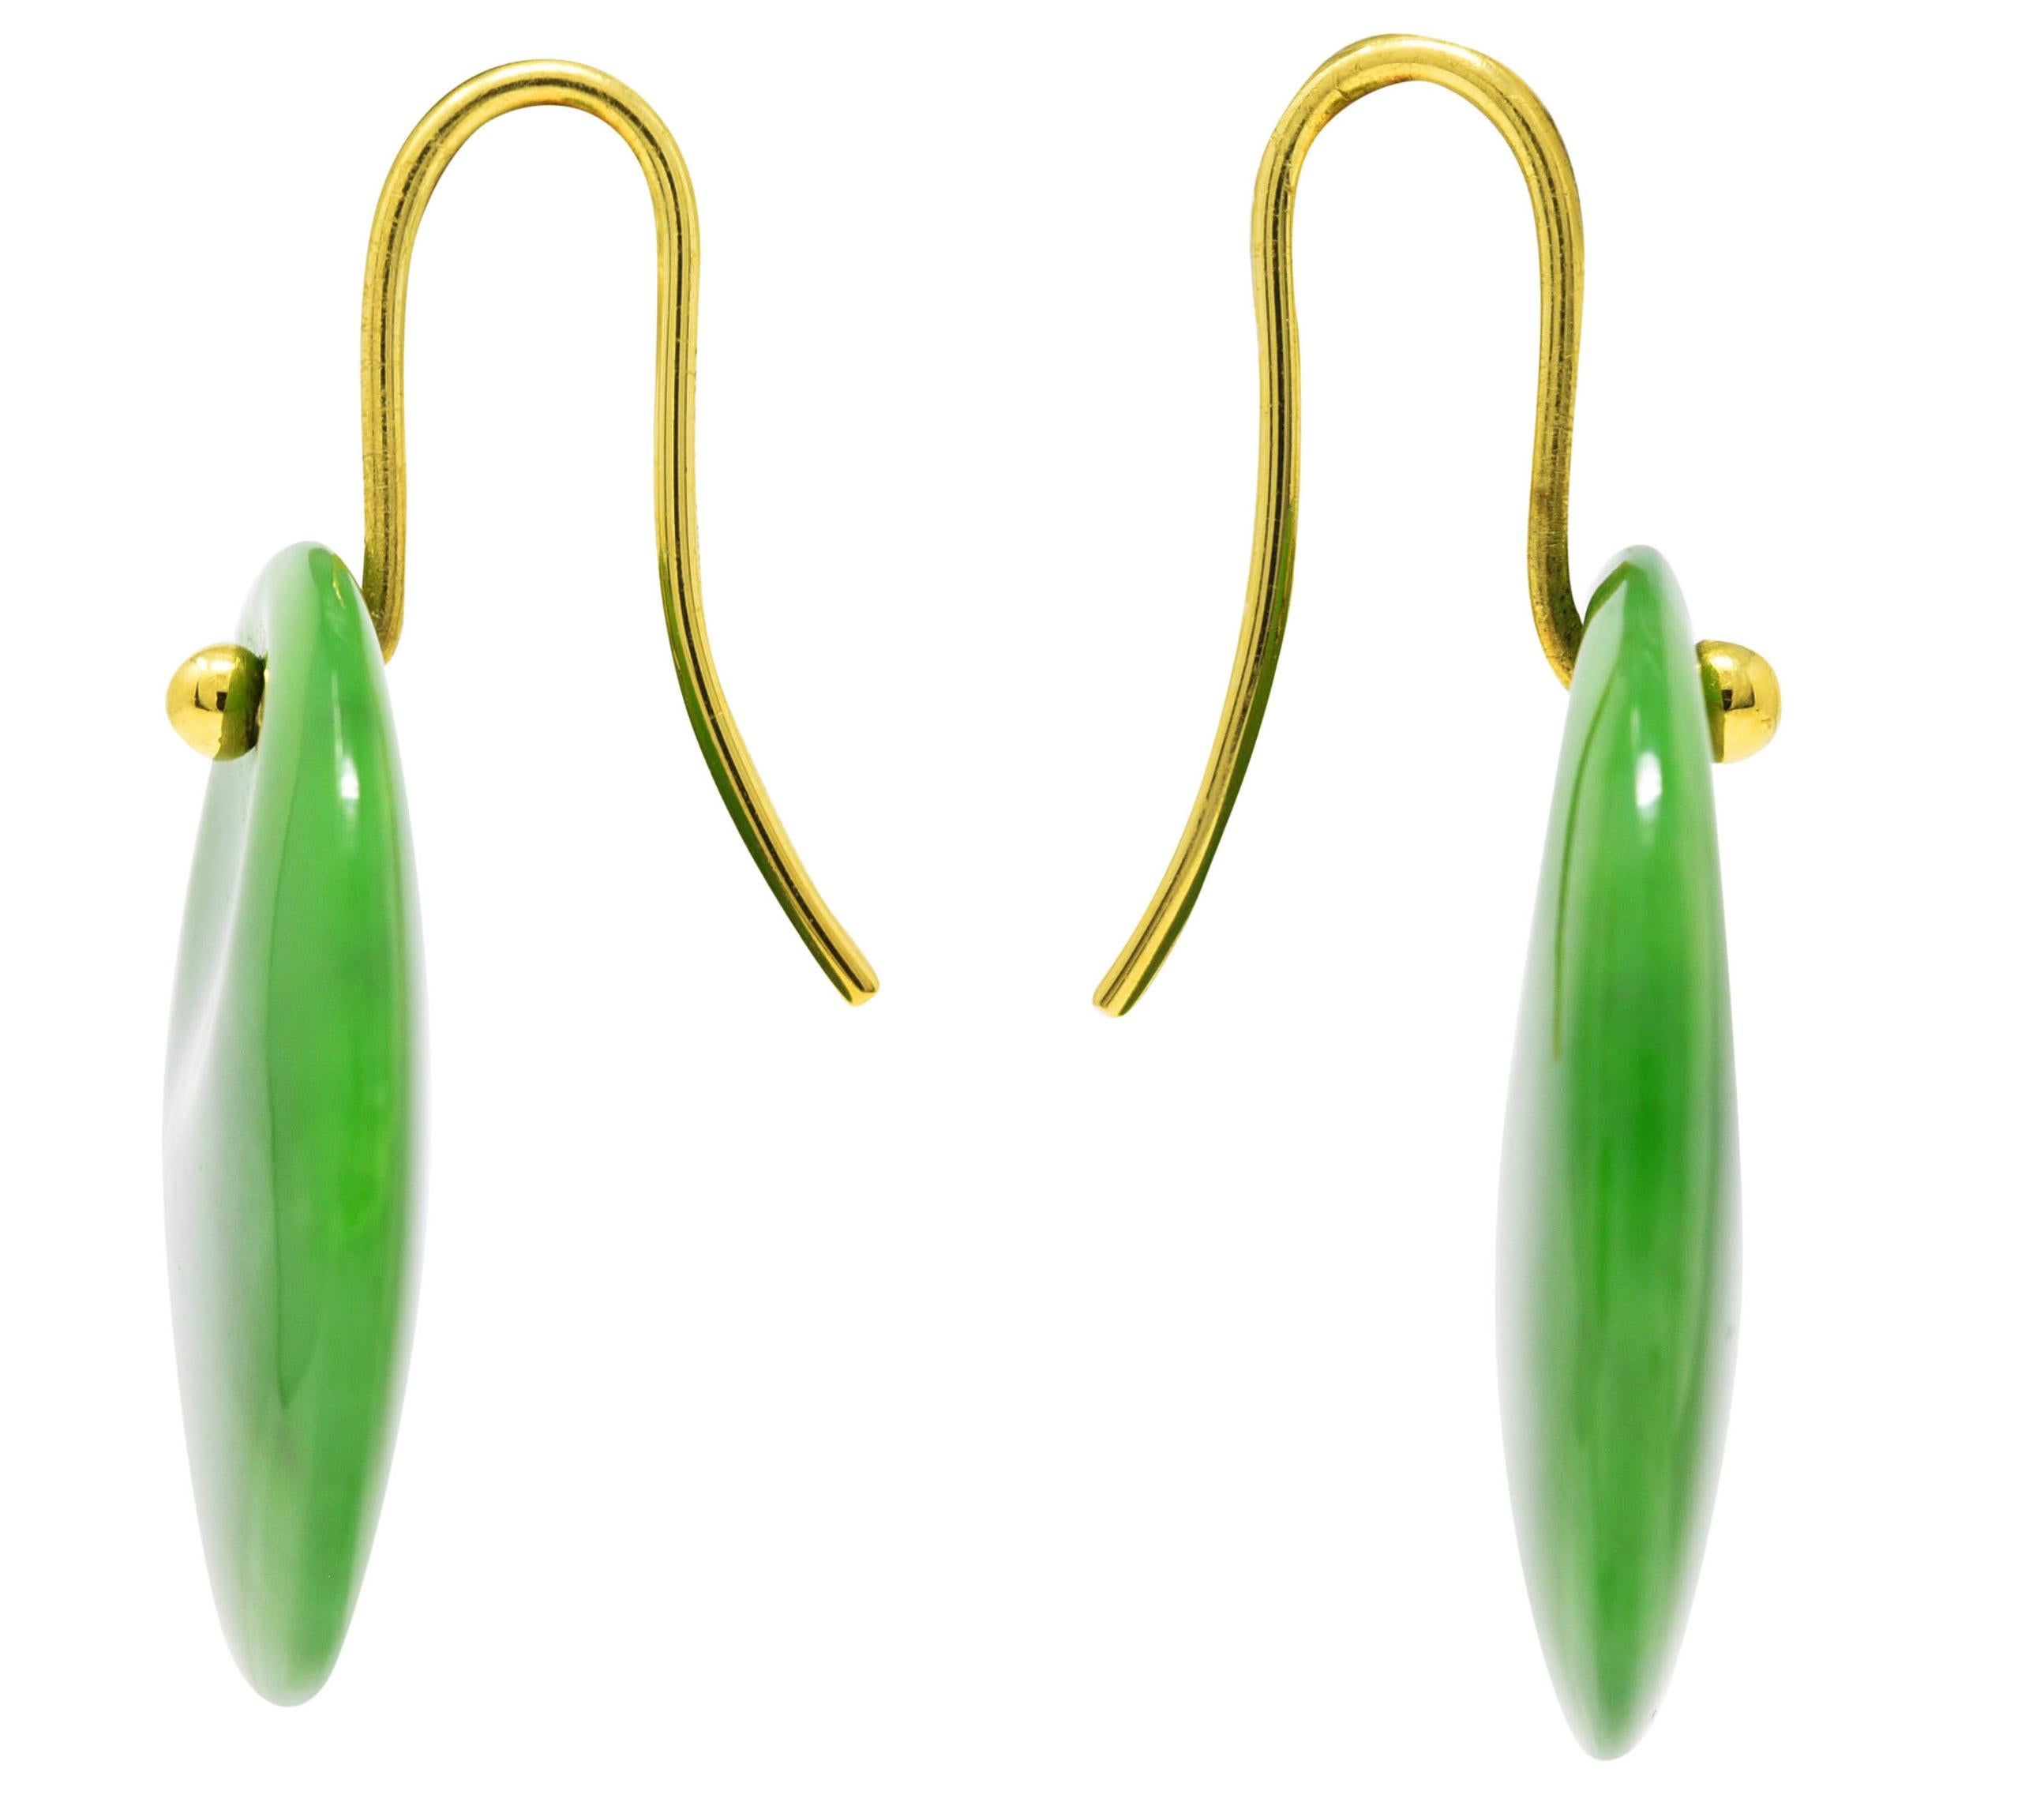 Earrings are designed as 25.0 mm round carved jade disks with circular contour. Translucent medium yellowish green with dark green mottling. Suspended from wire ear hooks terminating with gold beads. Stamped 750 for 18 karat gold. Signed Peretti